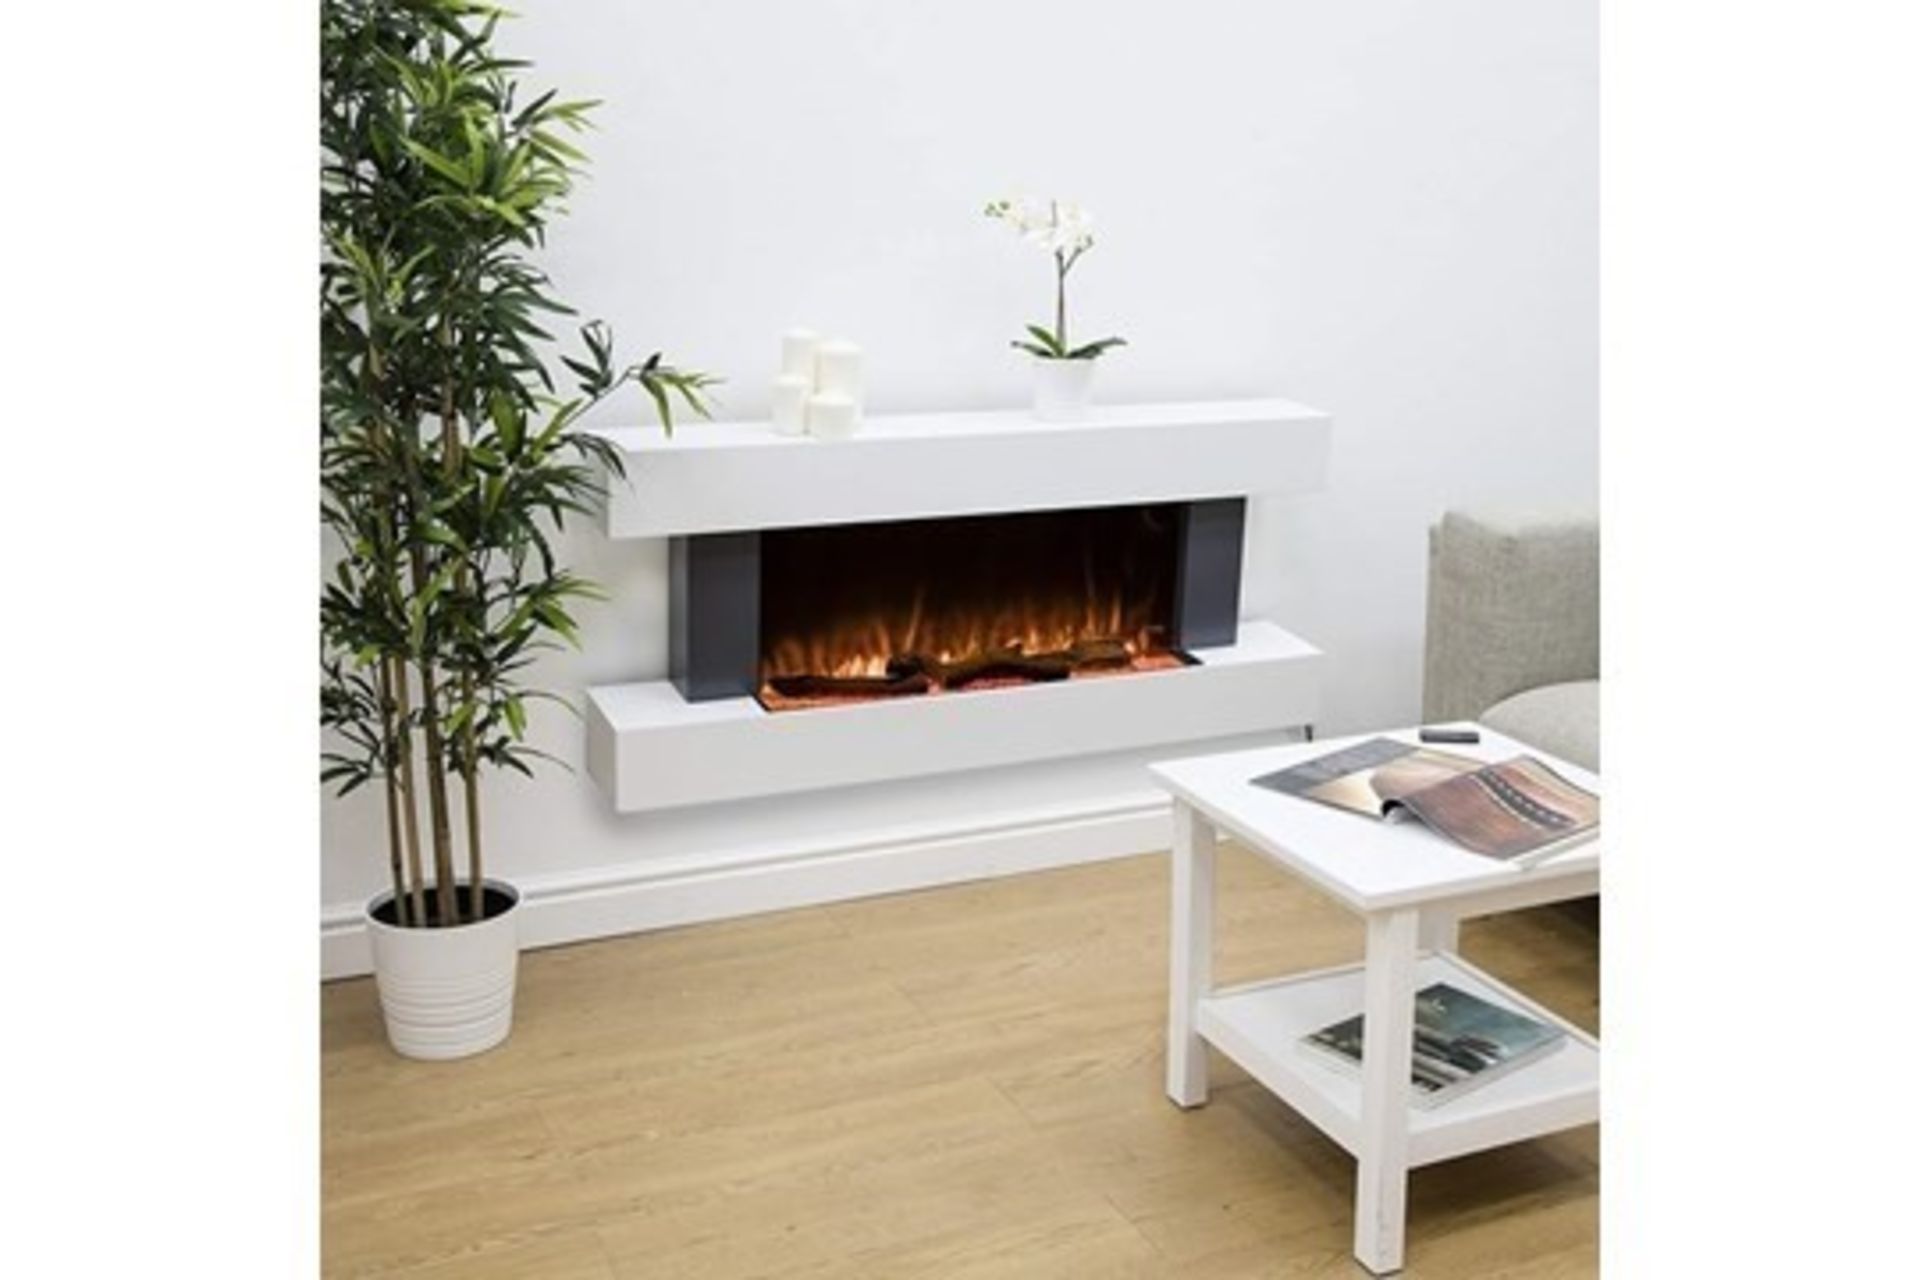 Warmlite 2000w Wall Mounted surround electric fire place suite with LED flame effect, new and boxed, - Image 2 of 4